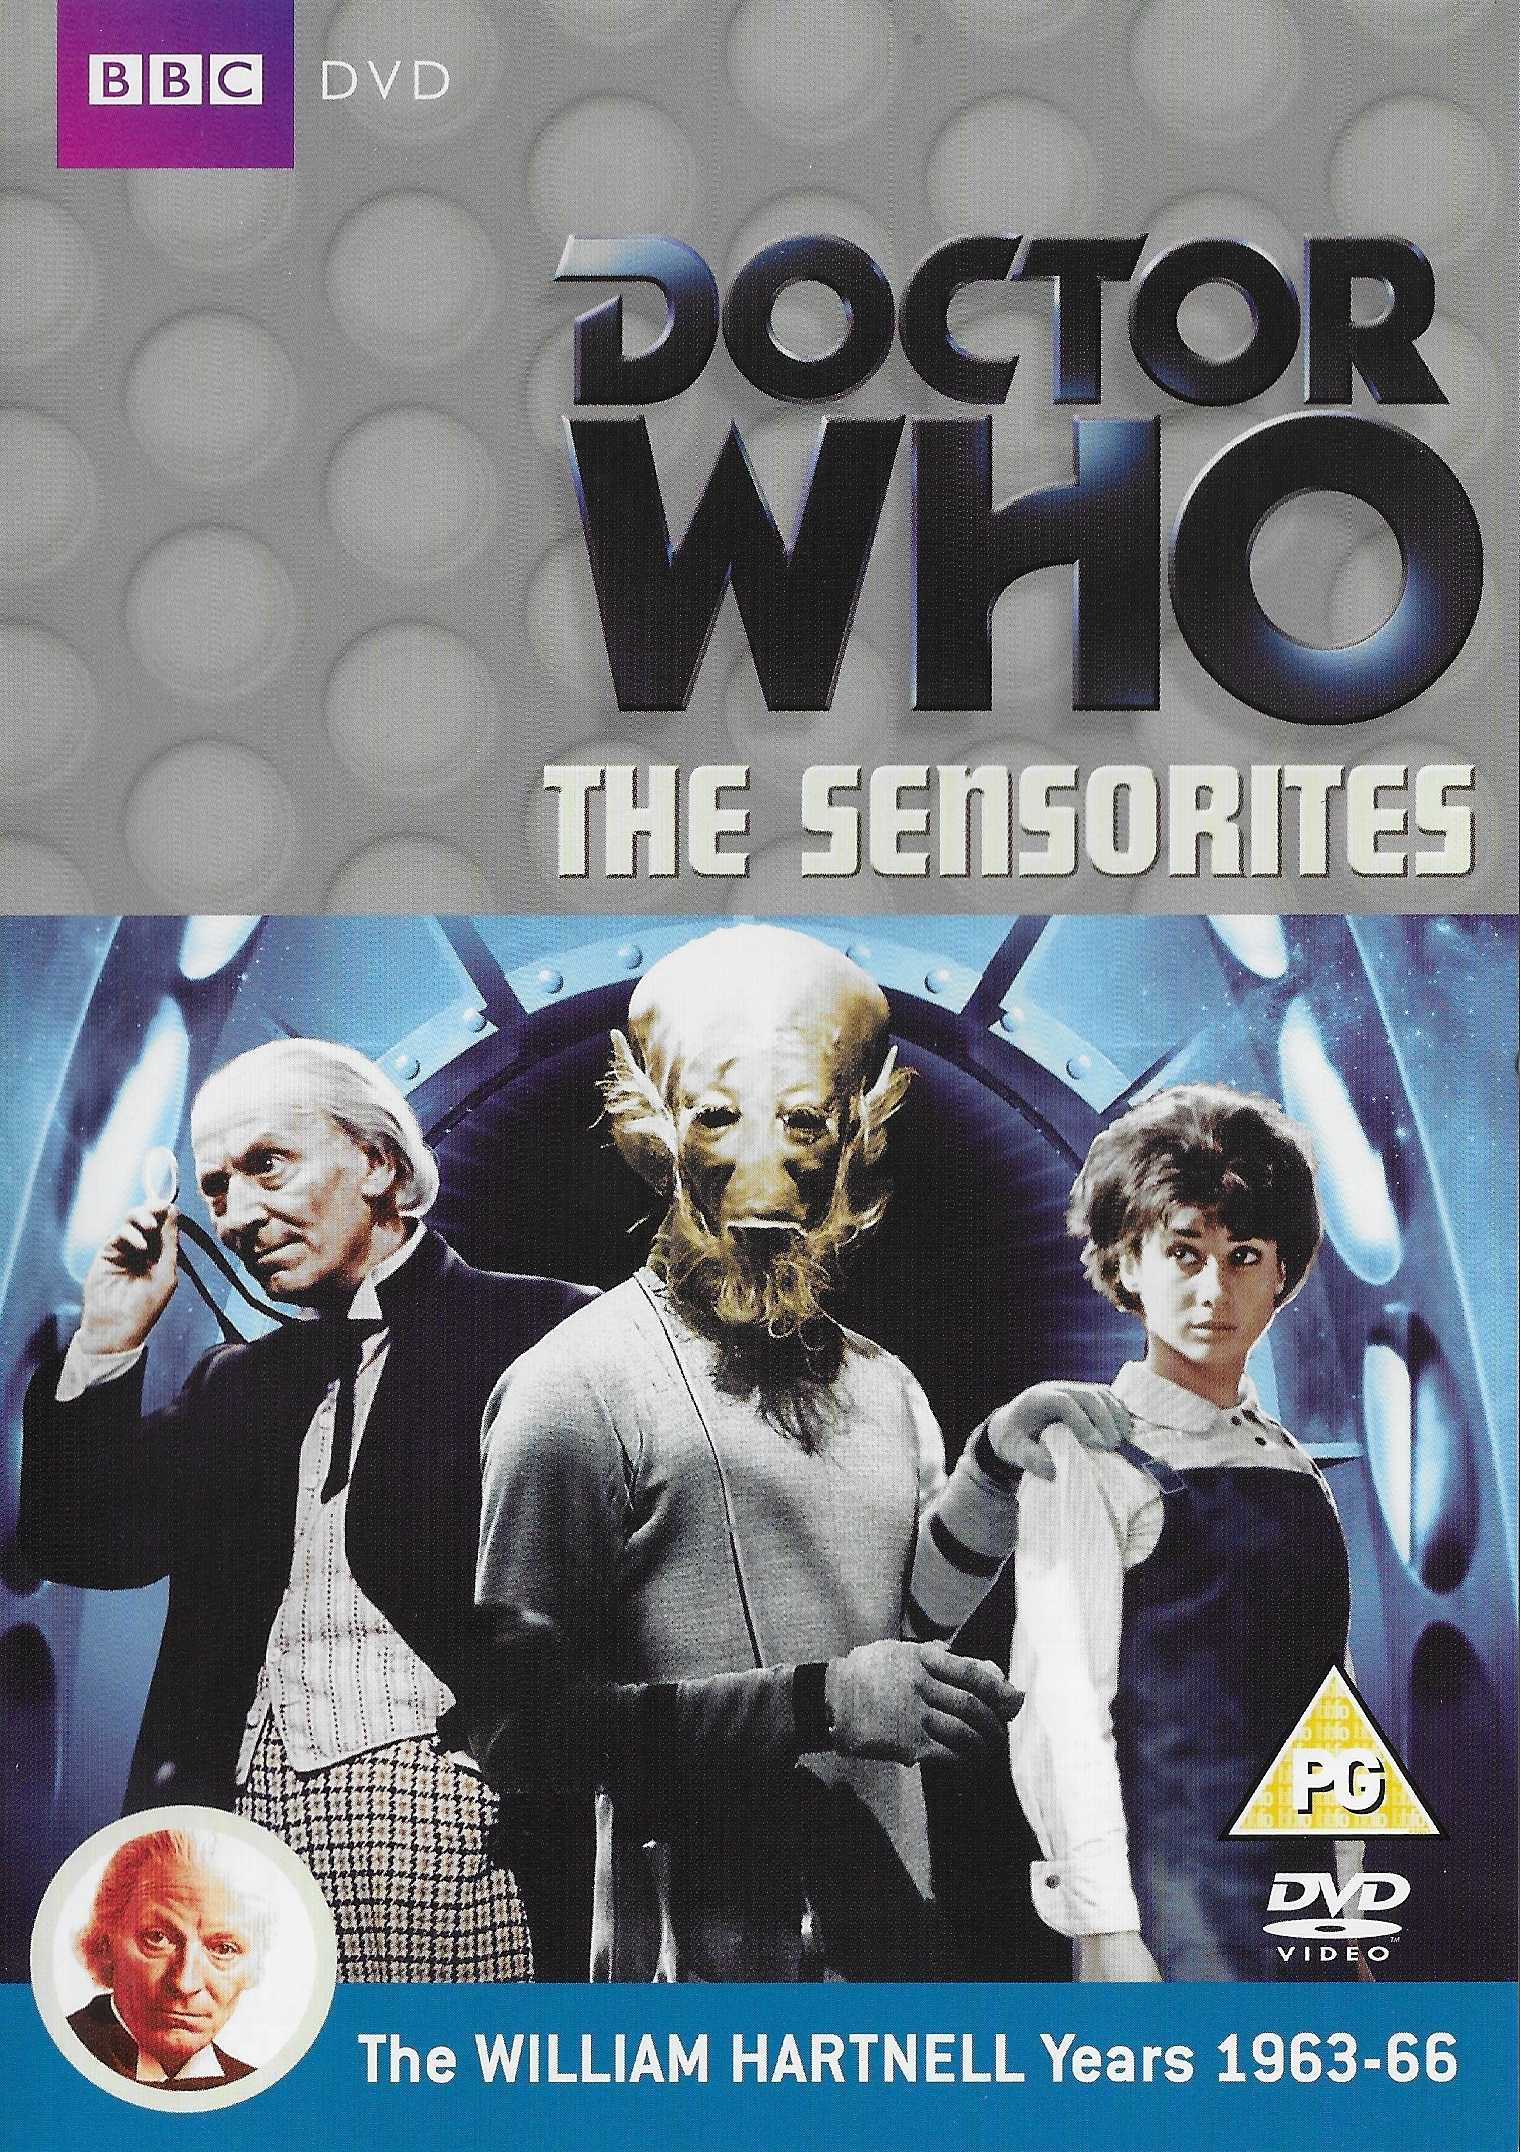 Picture of BBCDVD 3377 Doctor Who - The Sensorites by artist Peter R. Newman from the BBC records and Tapes library